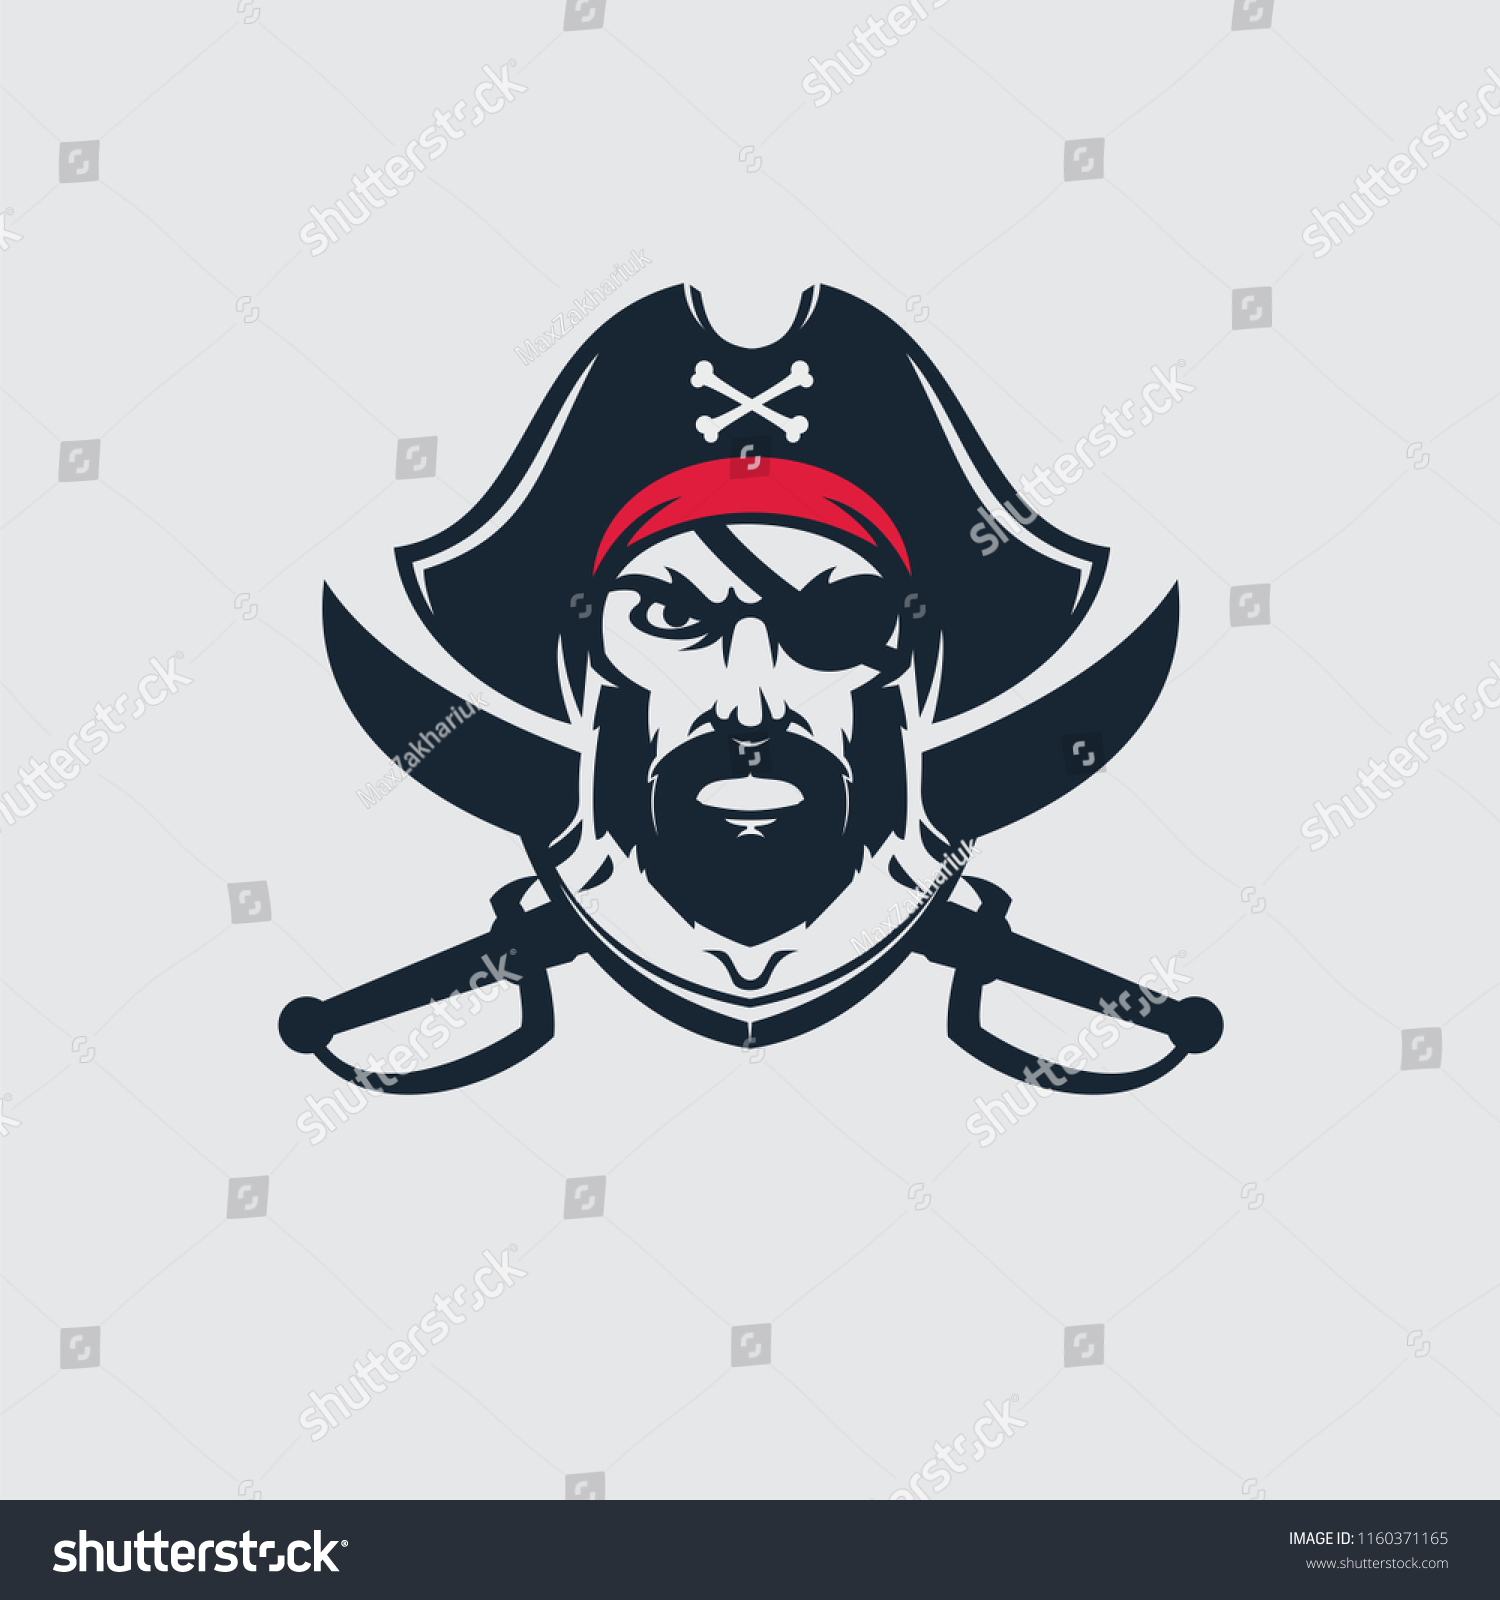 SVG of Pirate Skull with crossed sabers, logo. svg